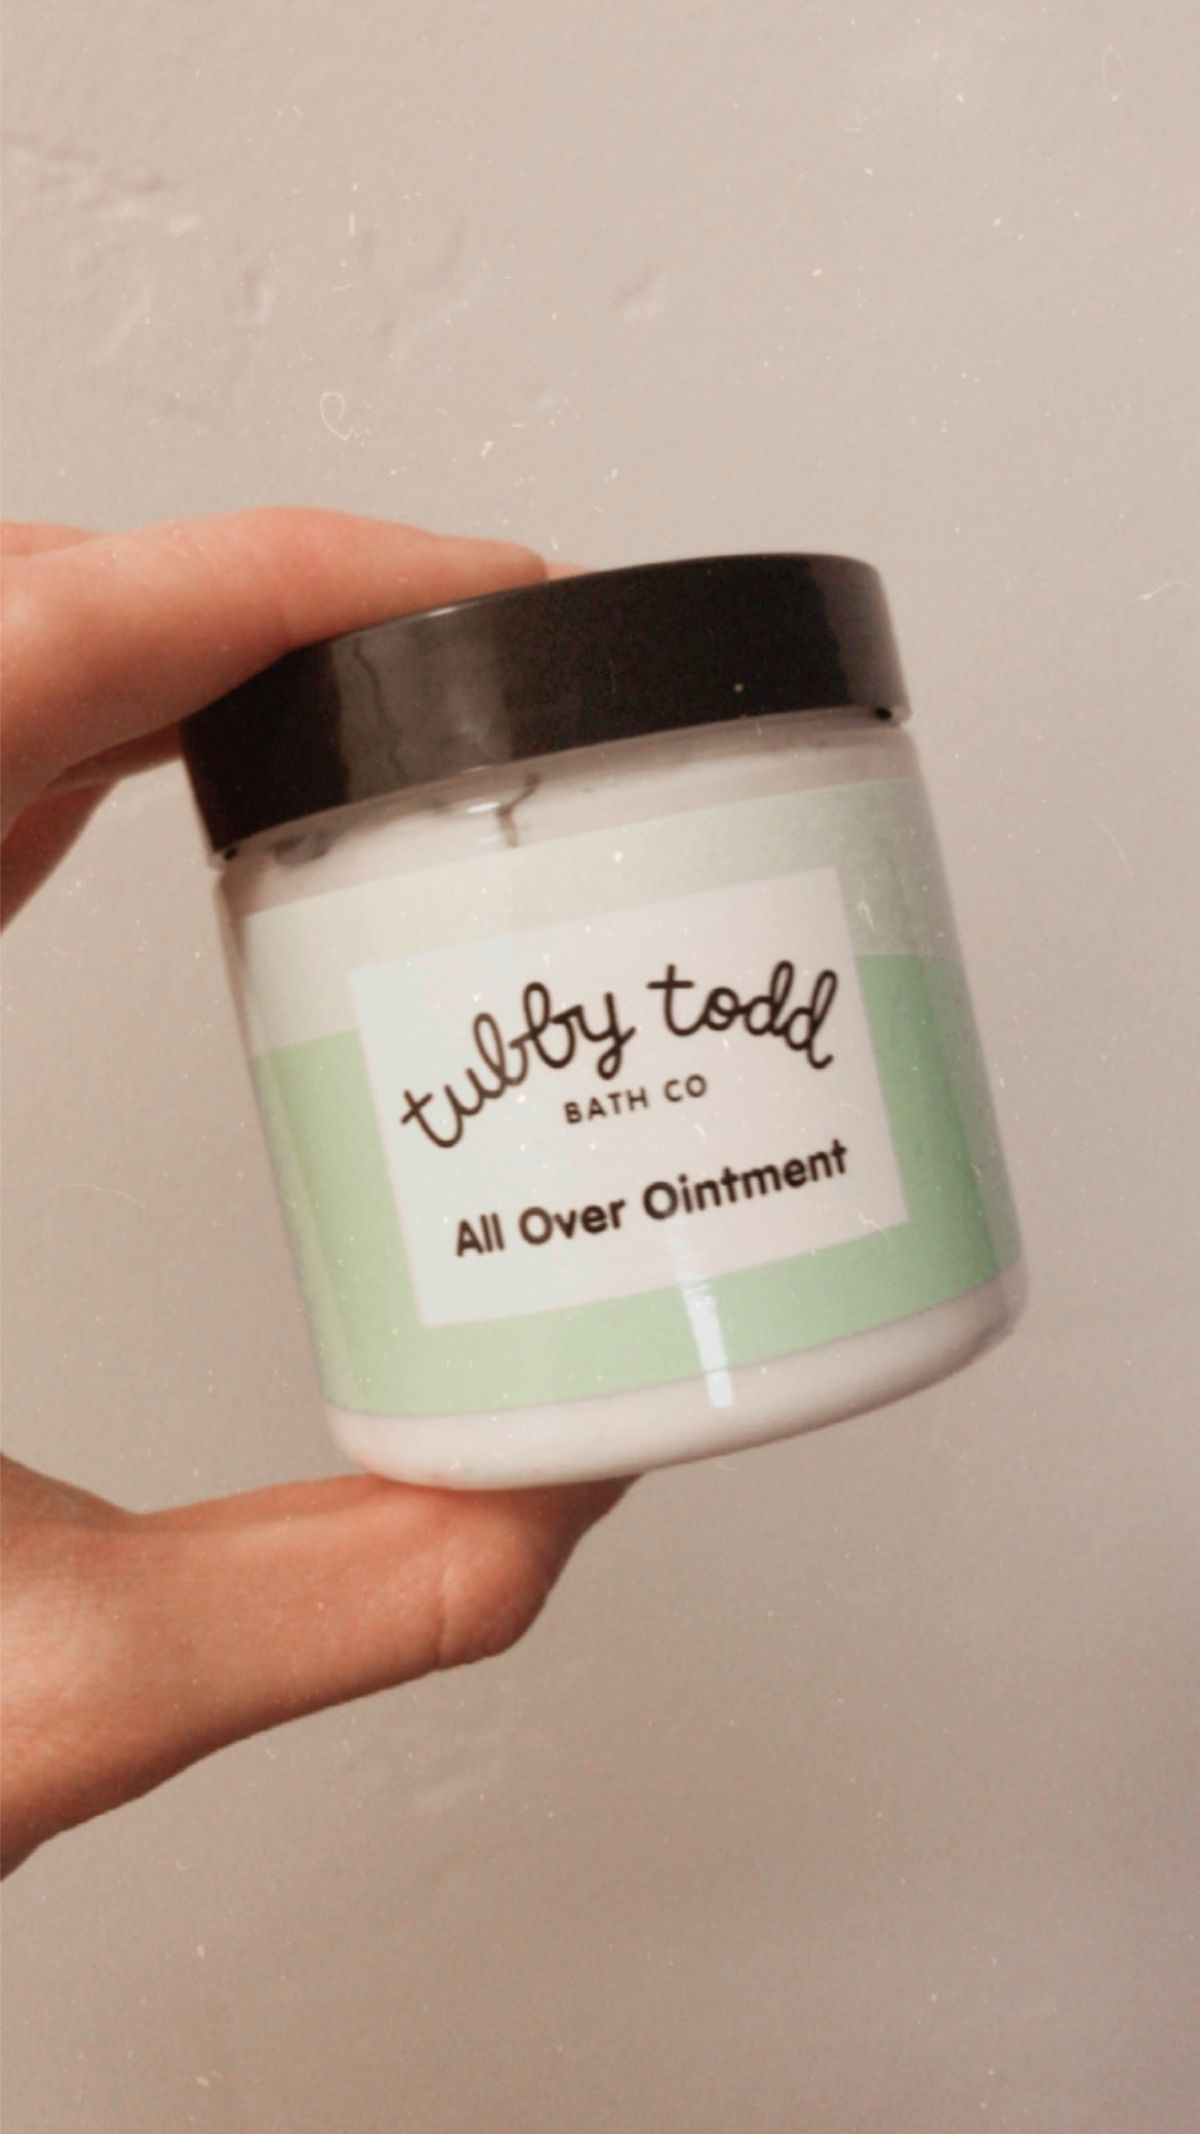 a hand holding a container of tubby todd all over ointment against a white wall background